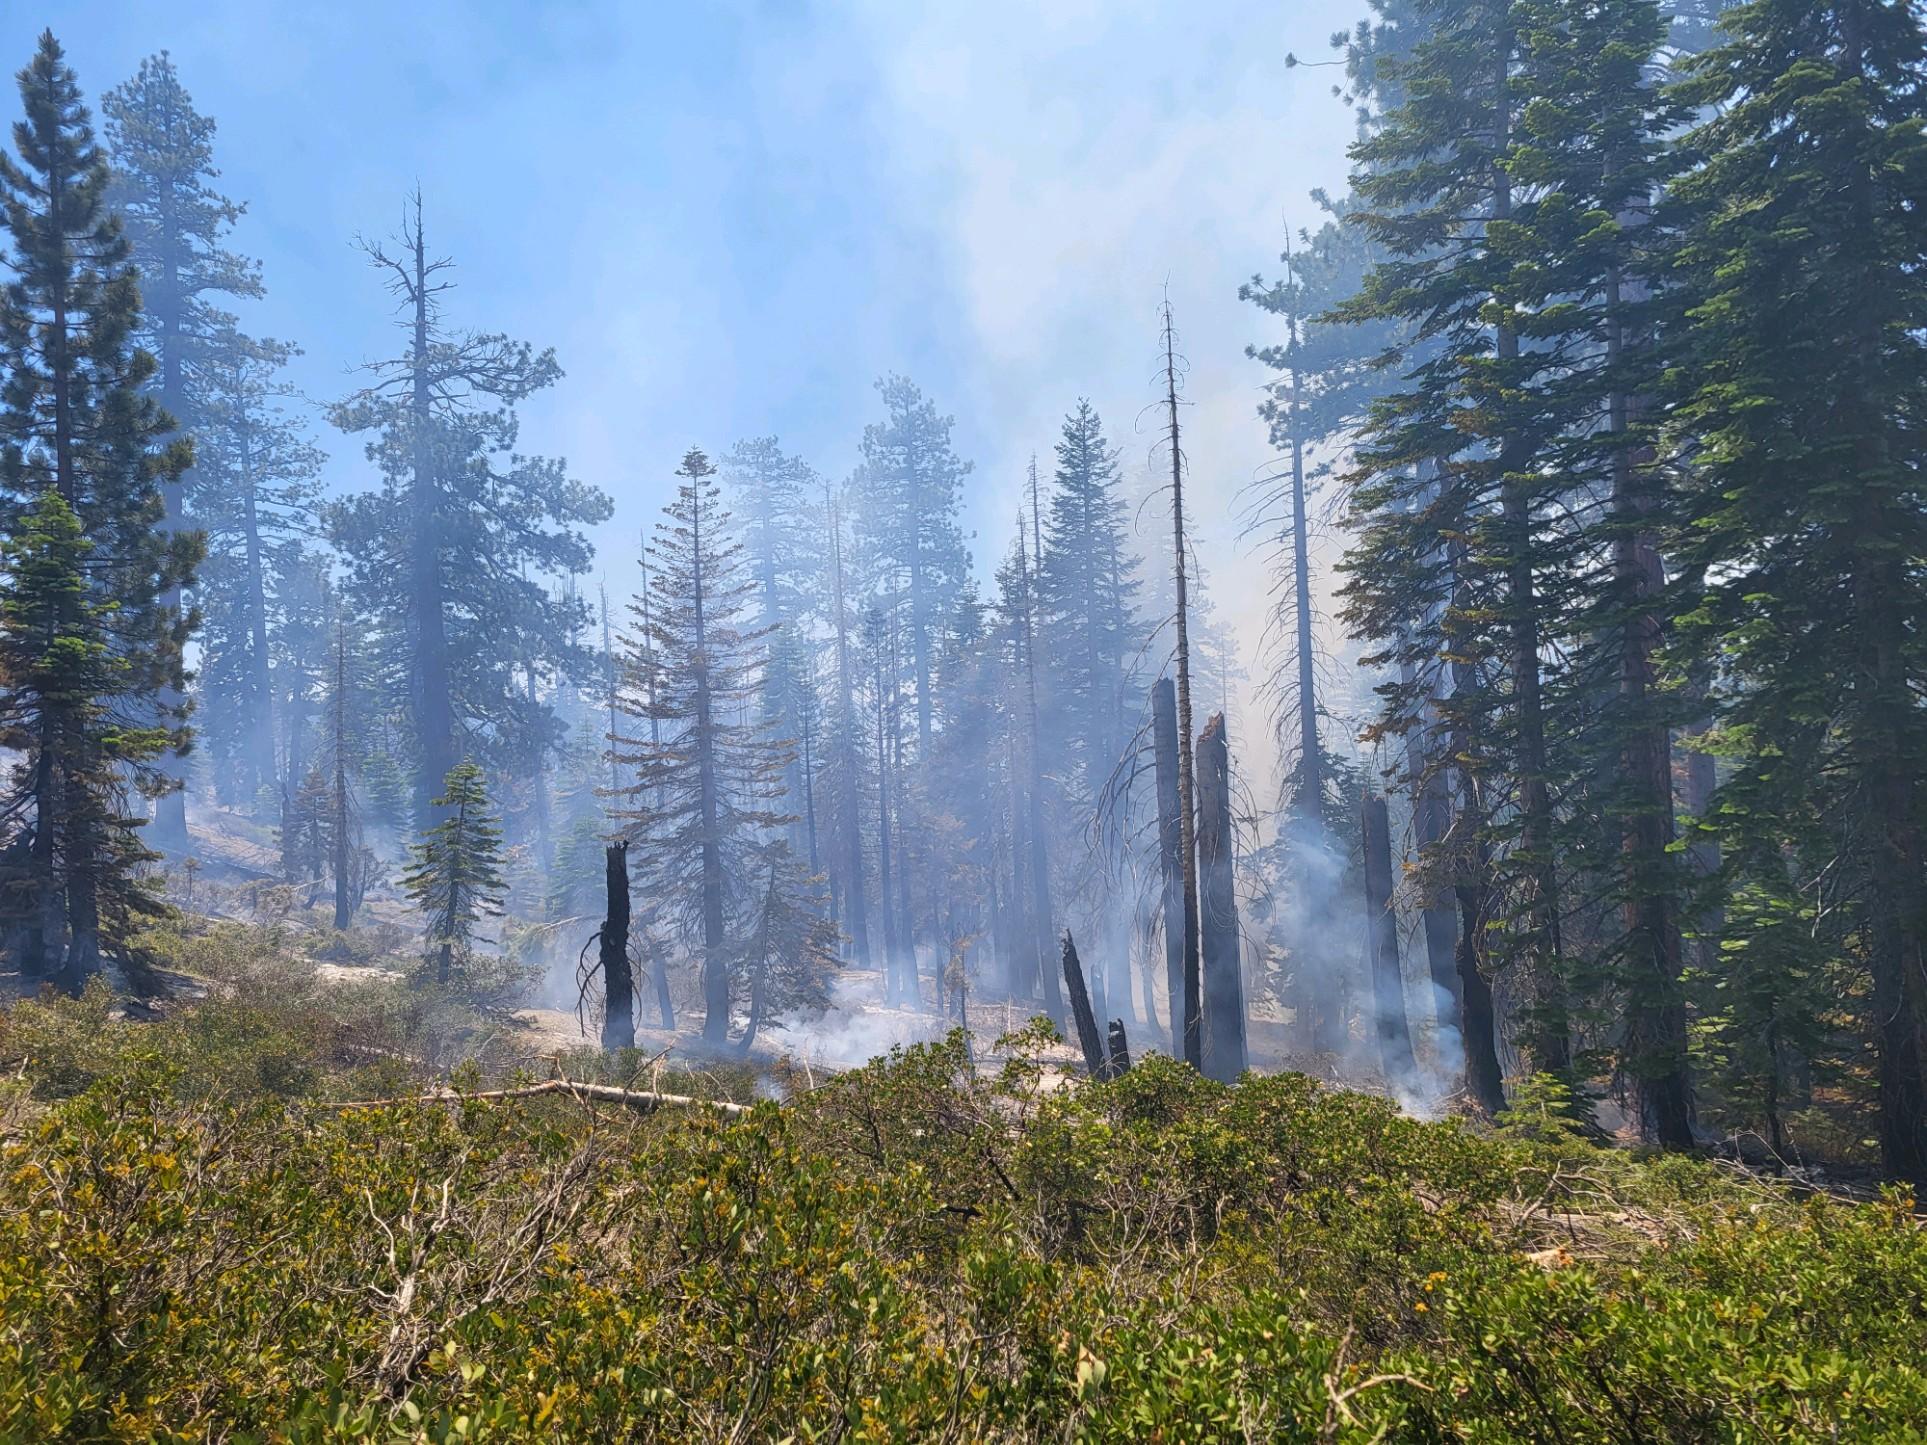 High country pine forest with smoke and fire against a blue sky.